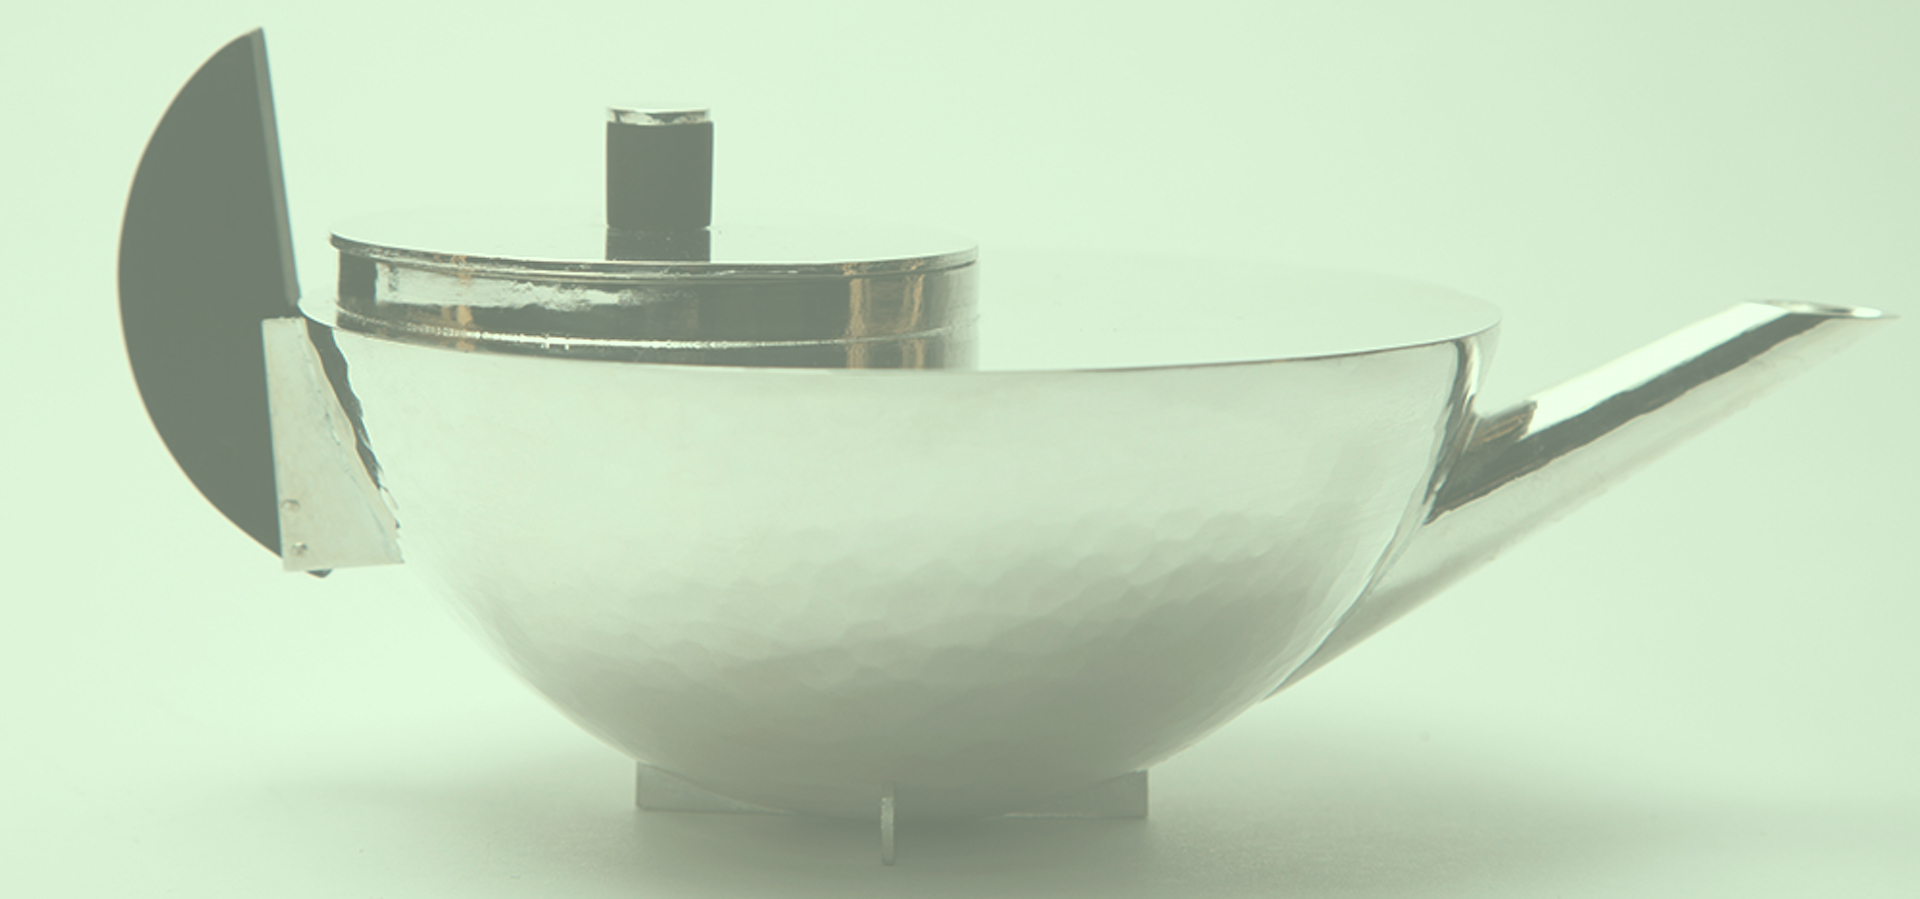 Tea pot by Marianna Brandt. The Bauhaus school brought deicsions around product choices into a space that queried multiple sources, business, art, materials, mathematics etc. It was the start of a good thing and I'd like to try and get back to some of those positives